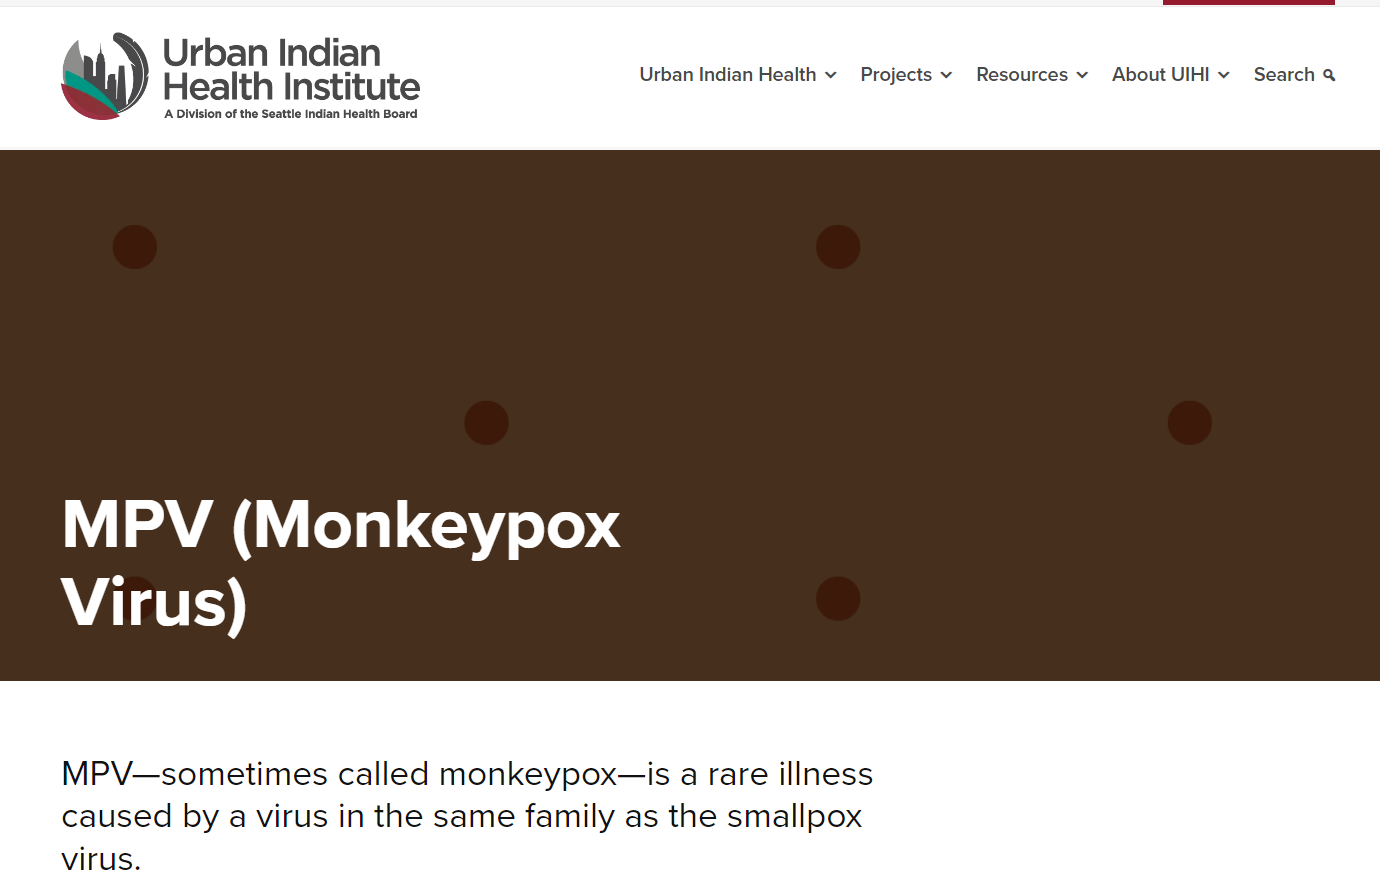 UIHI webpage shows a large brown header that says MPV (Monkeypox Virus)